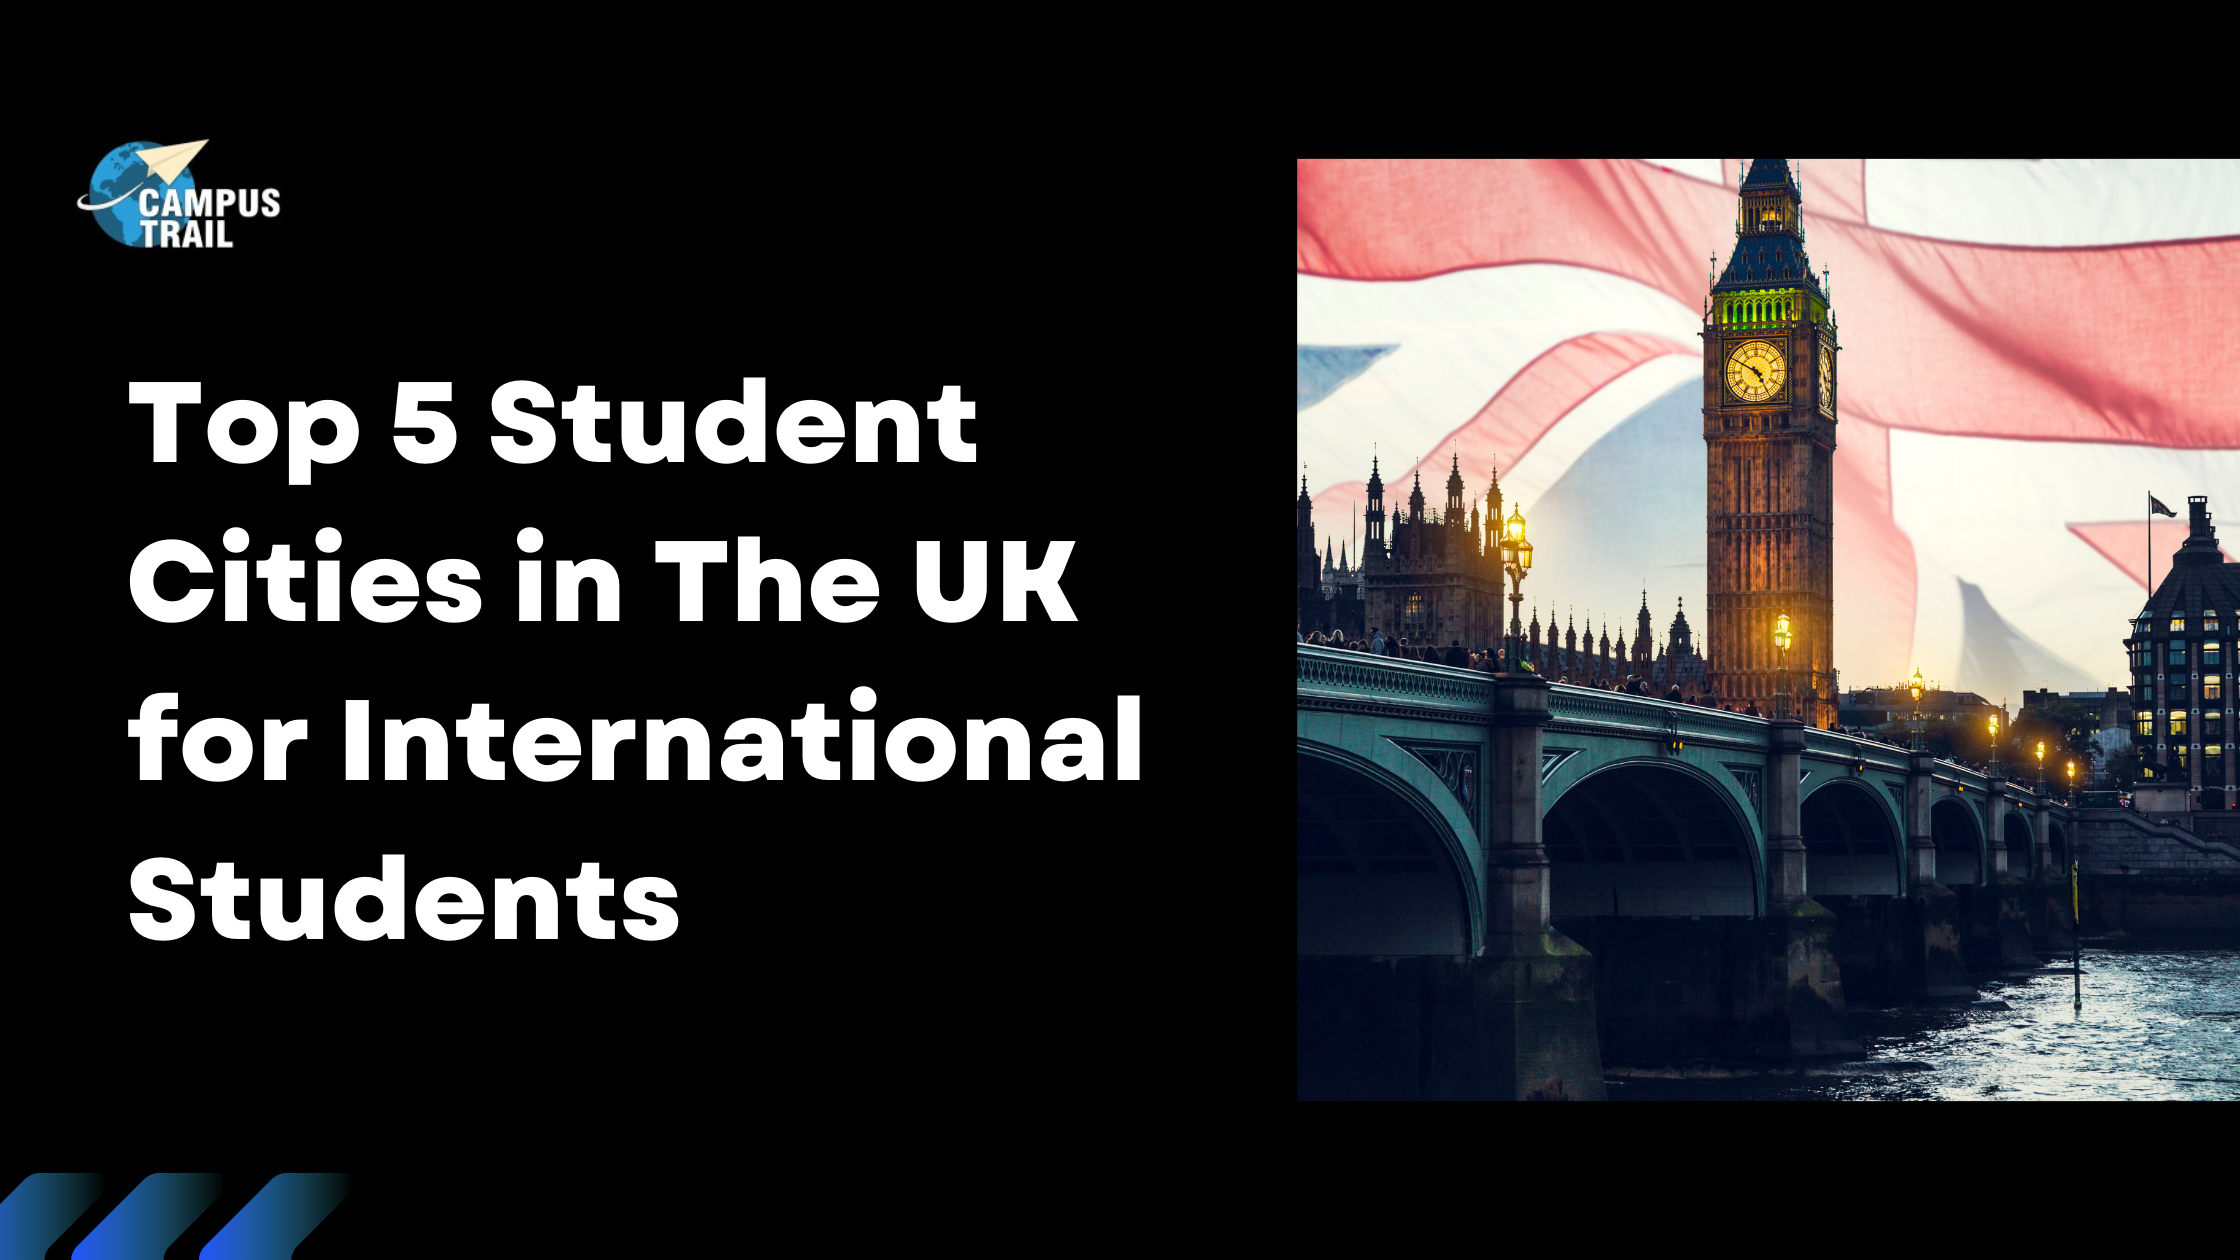 Top 5 Student Cities in The UK for International Students